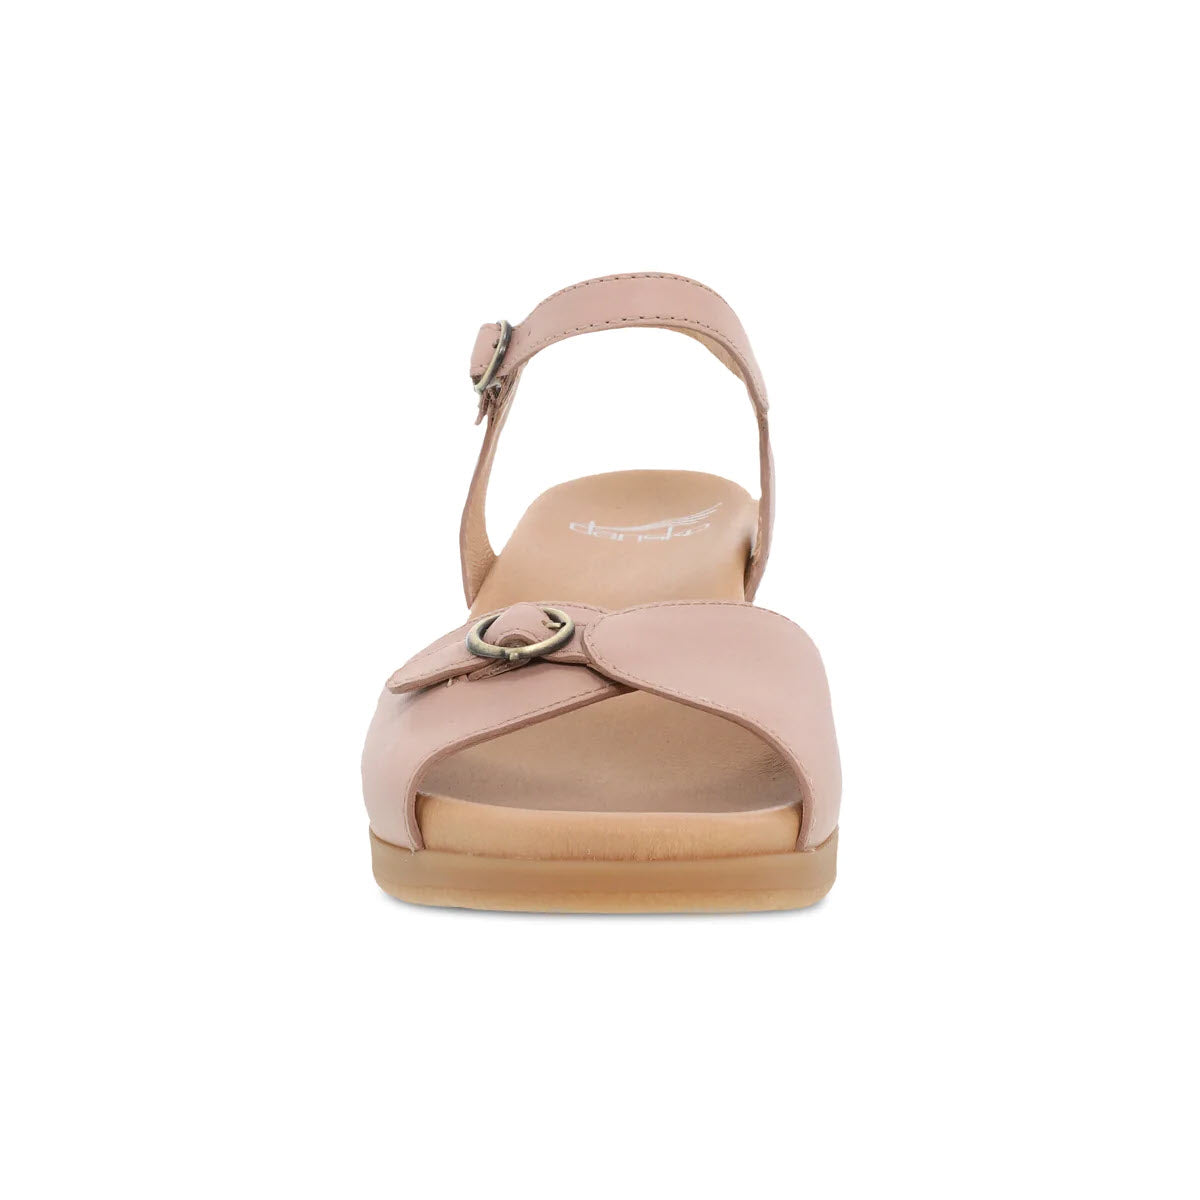 A single light pink Dansko Tessie Ballet women&#39;s heeled sandal with a buckle, viewed from the front, isolated on a white background.